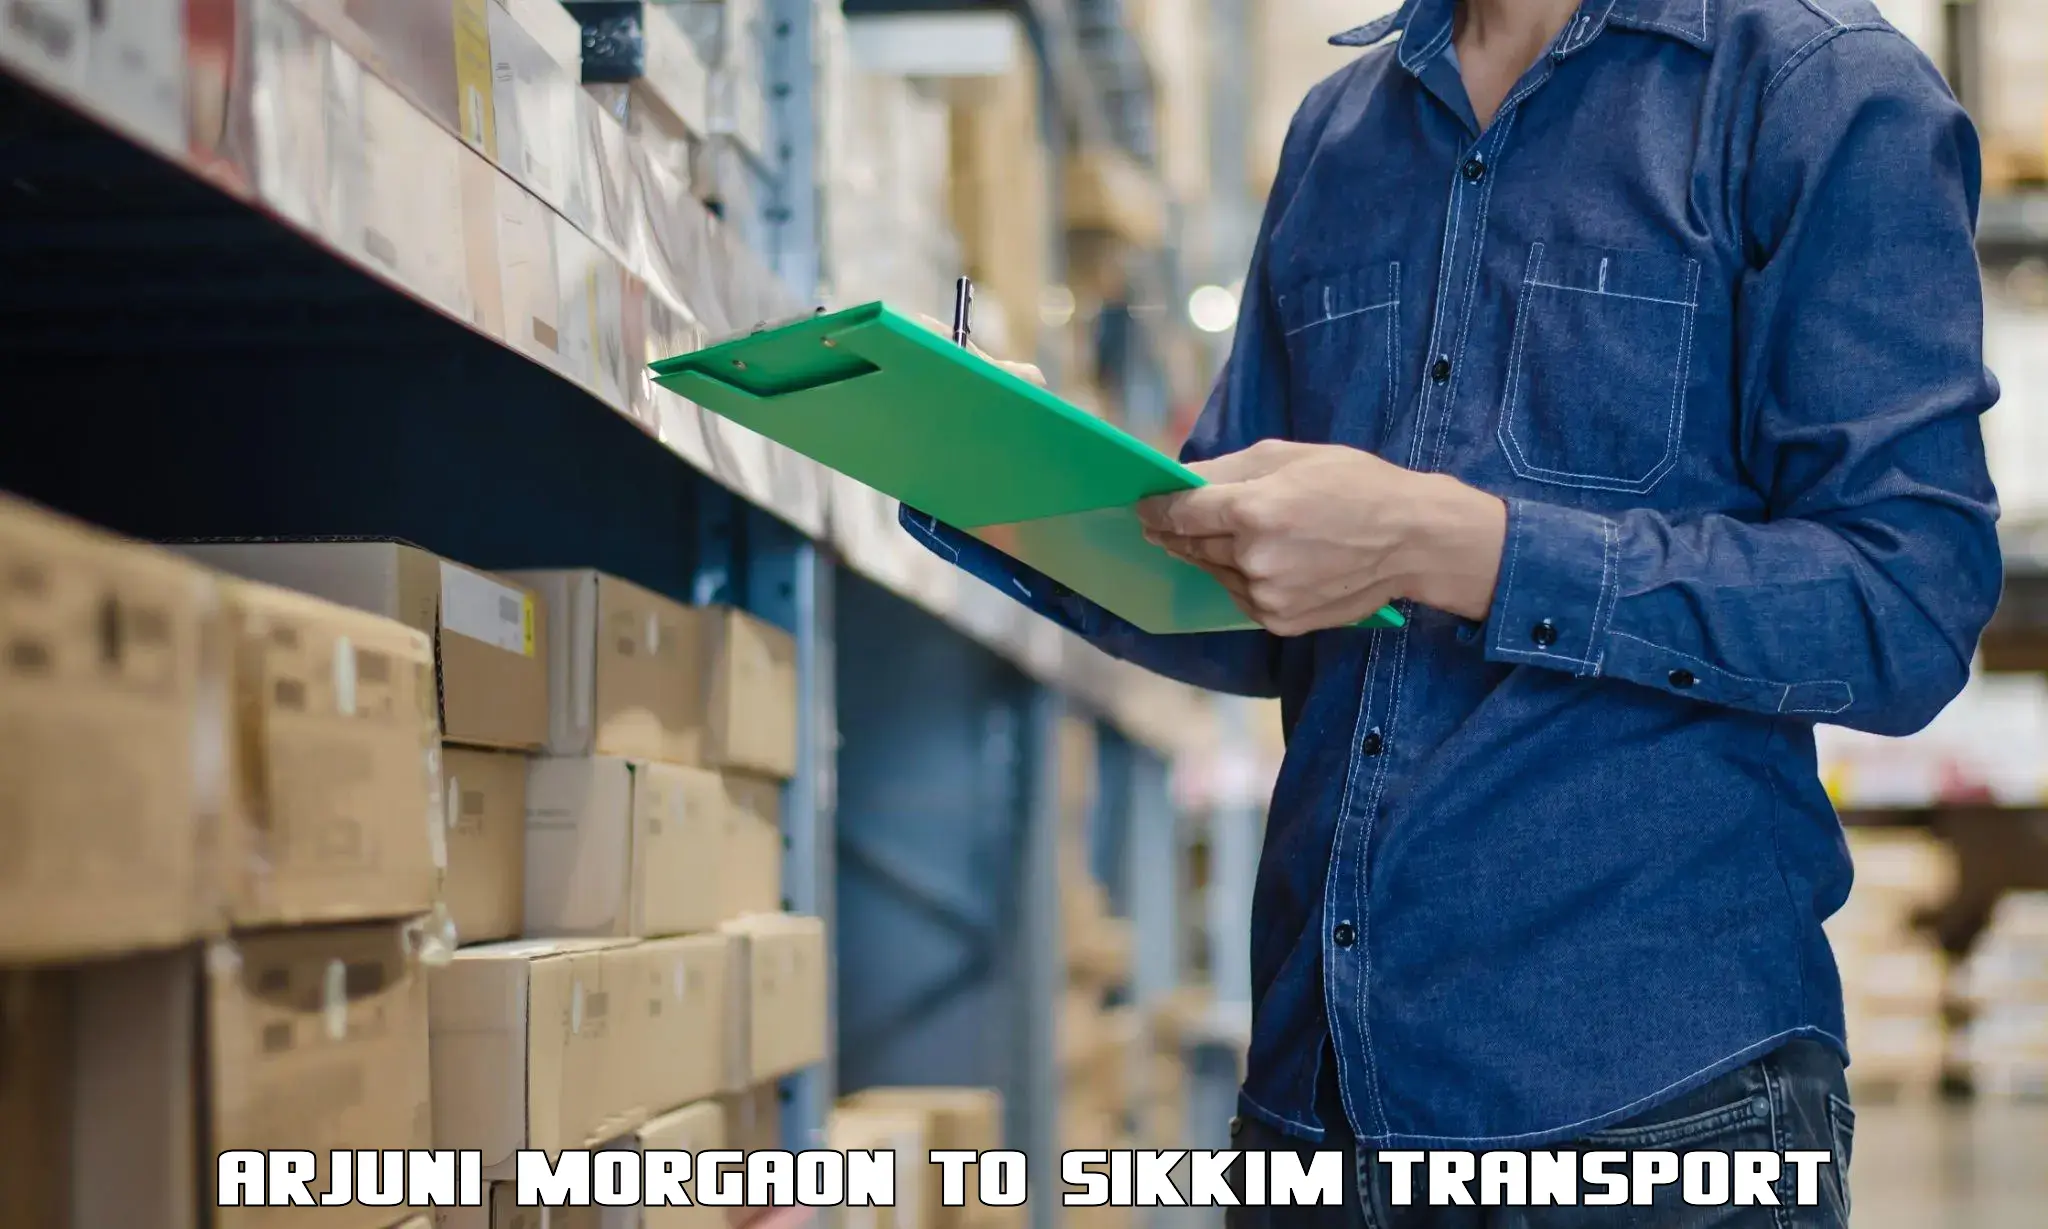 Nationwide transport services Arjuni Morgaon to West Sikkim